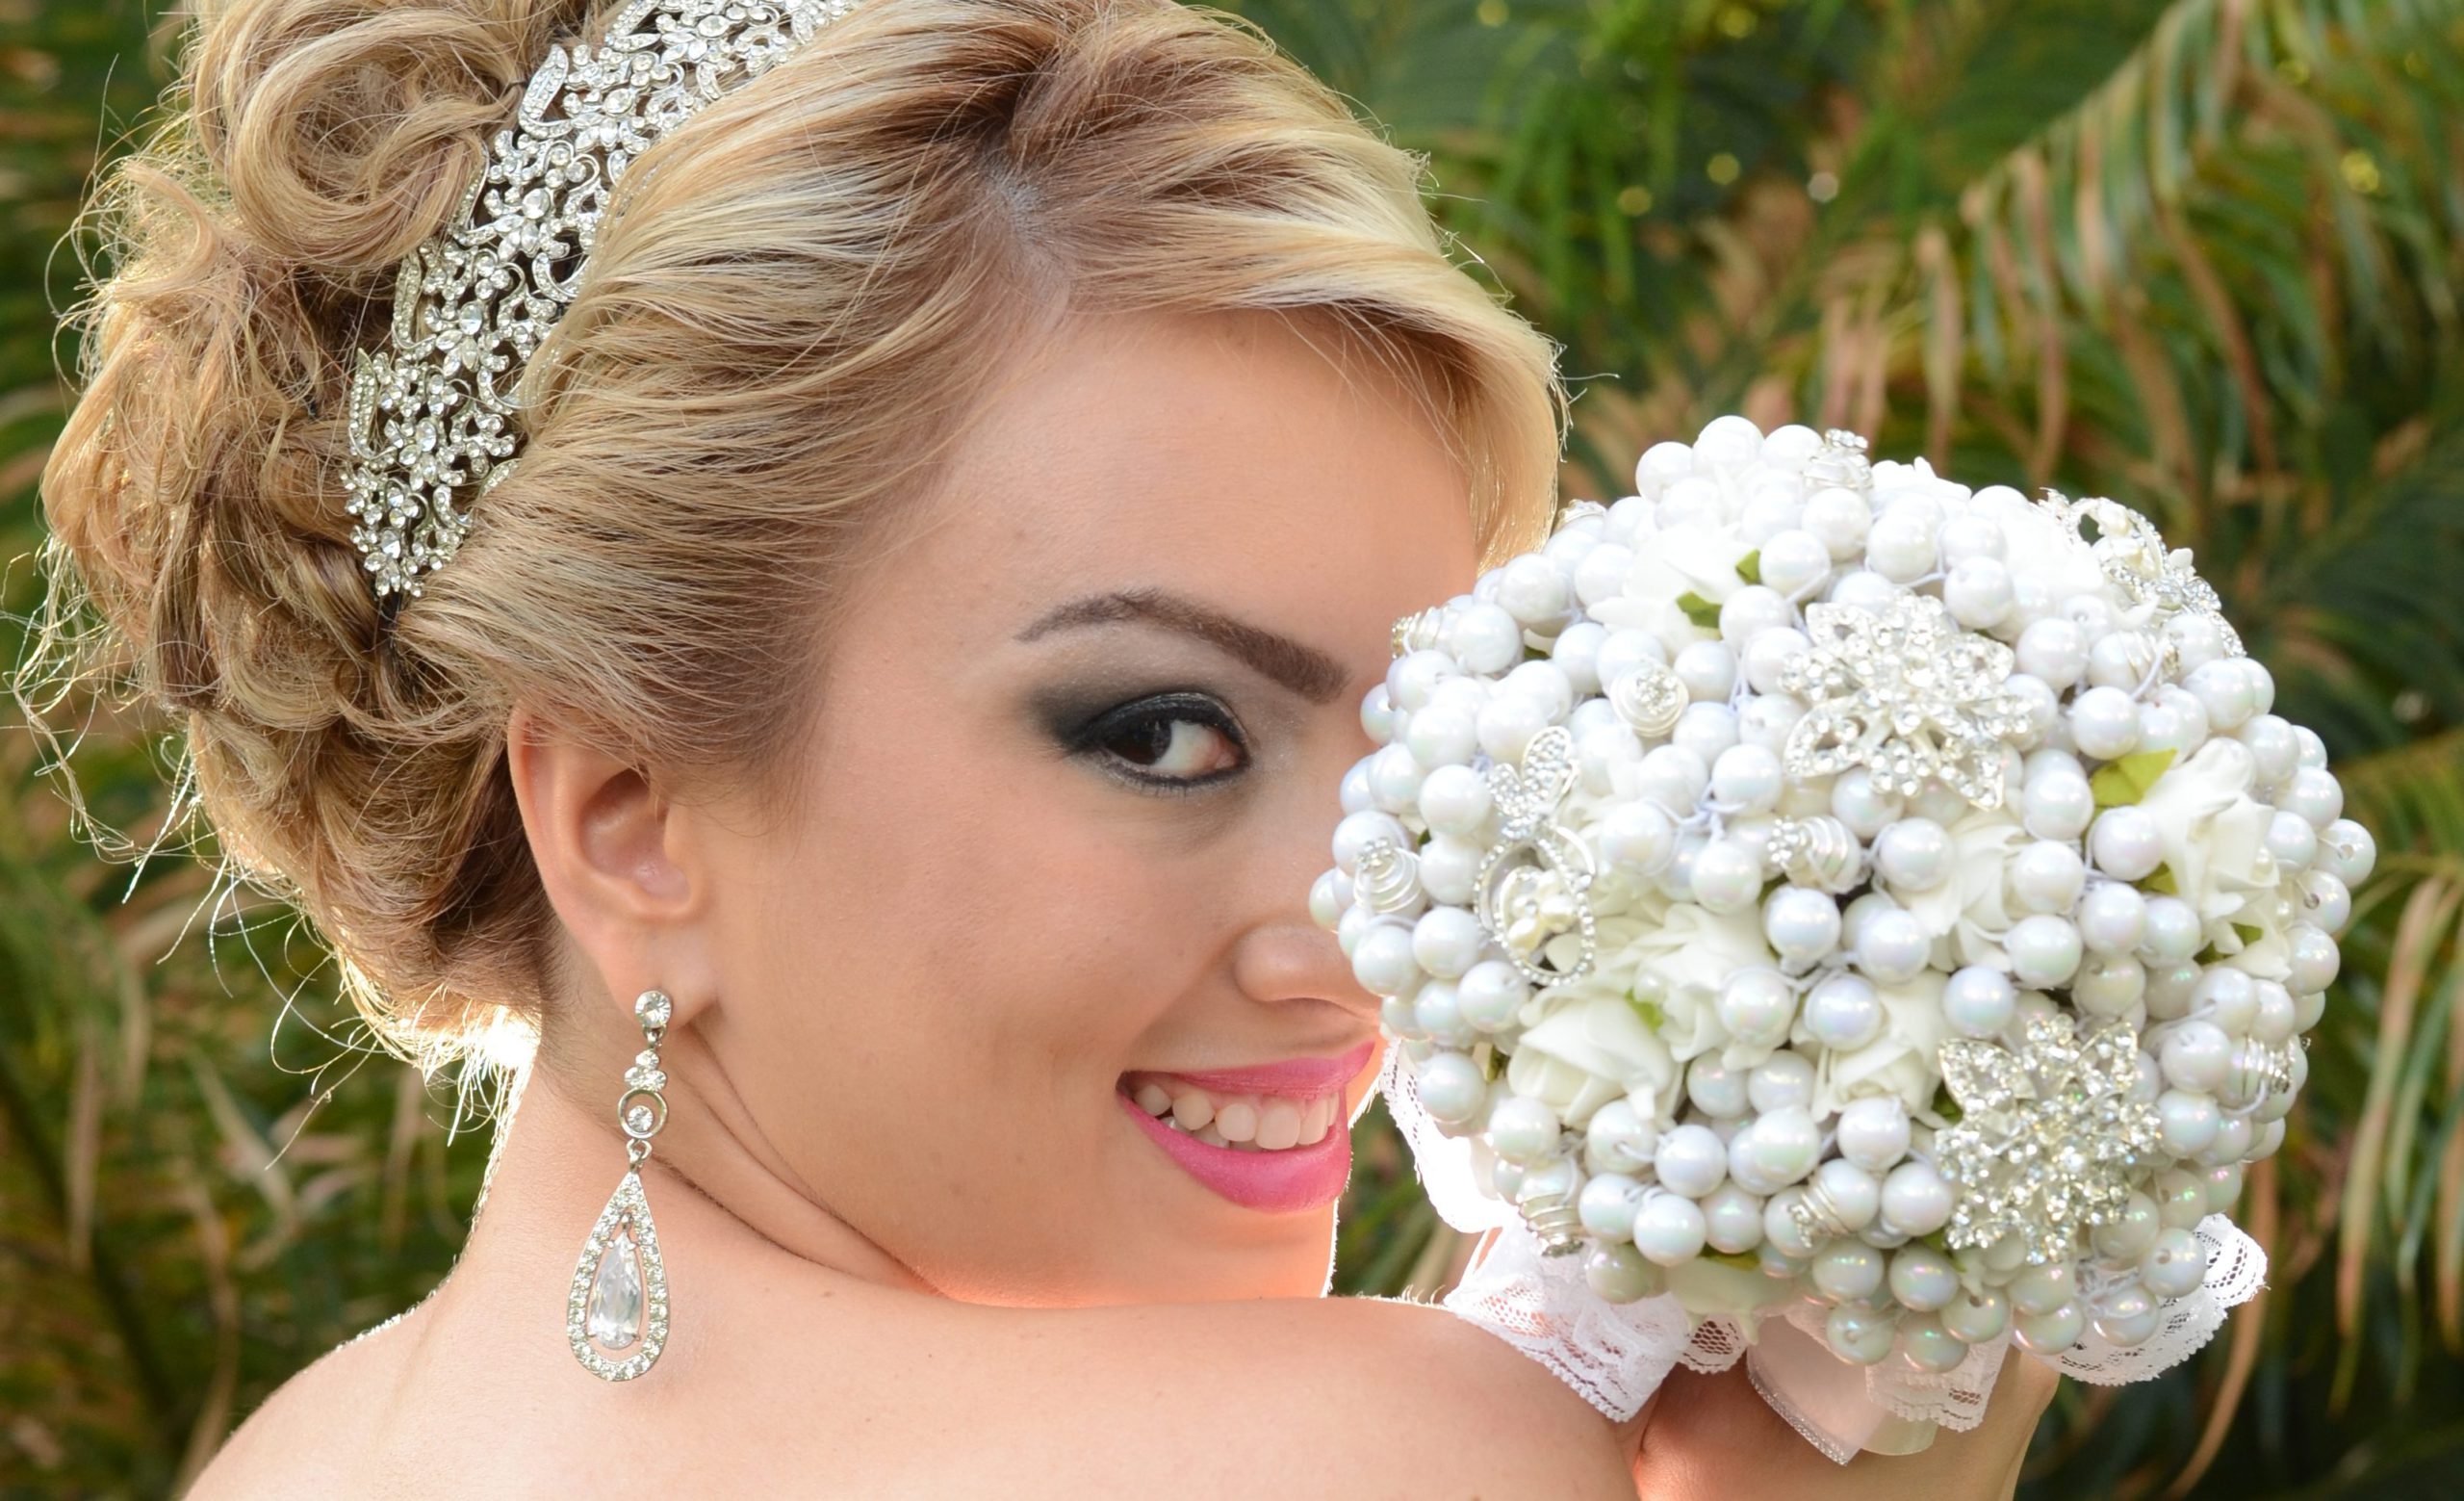 10 Top Skin Care Tips For Brides